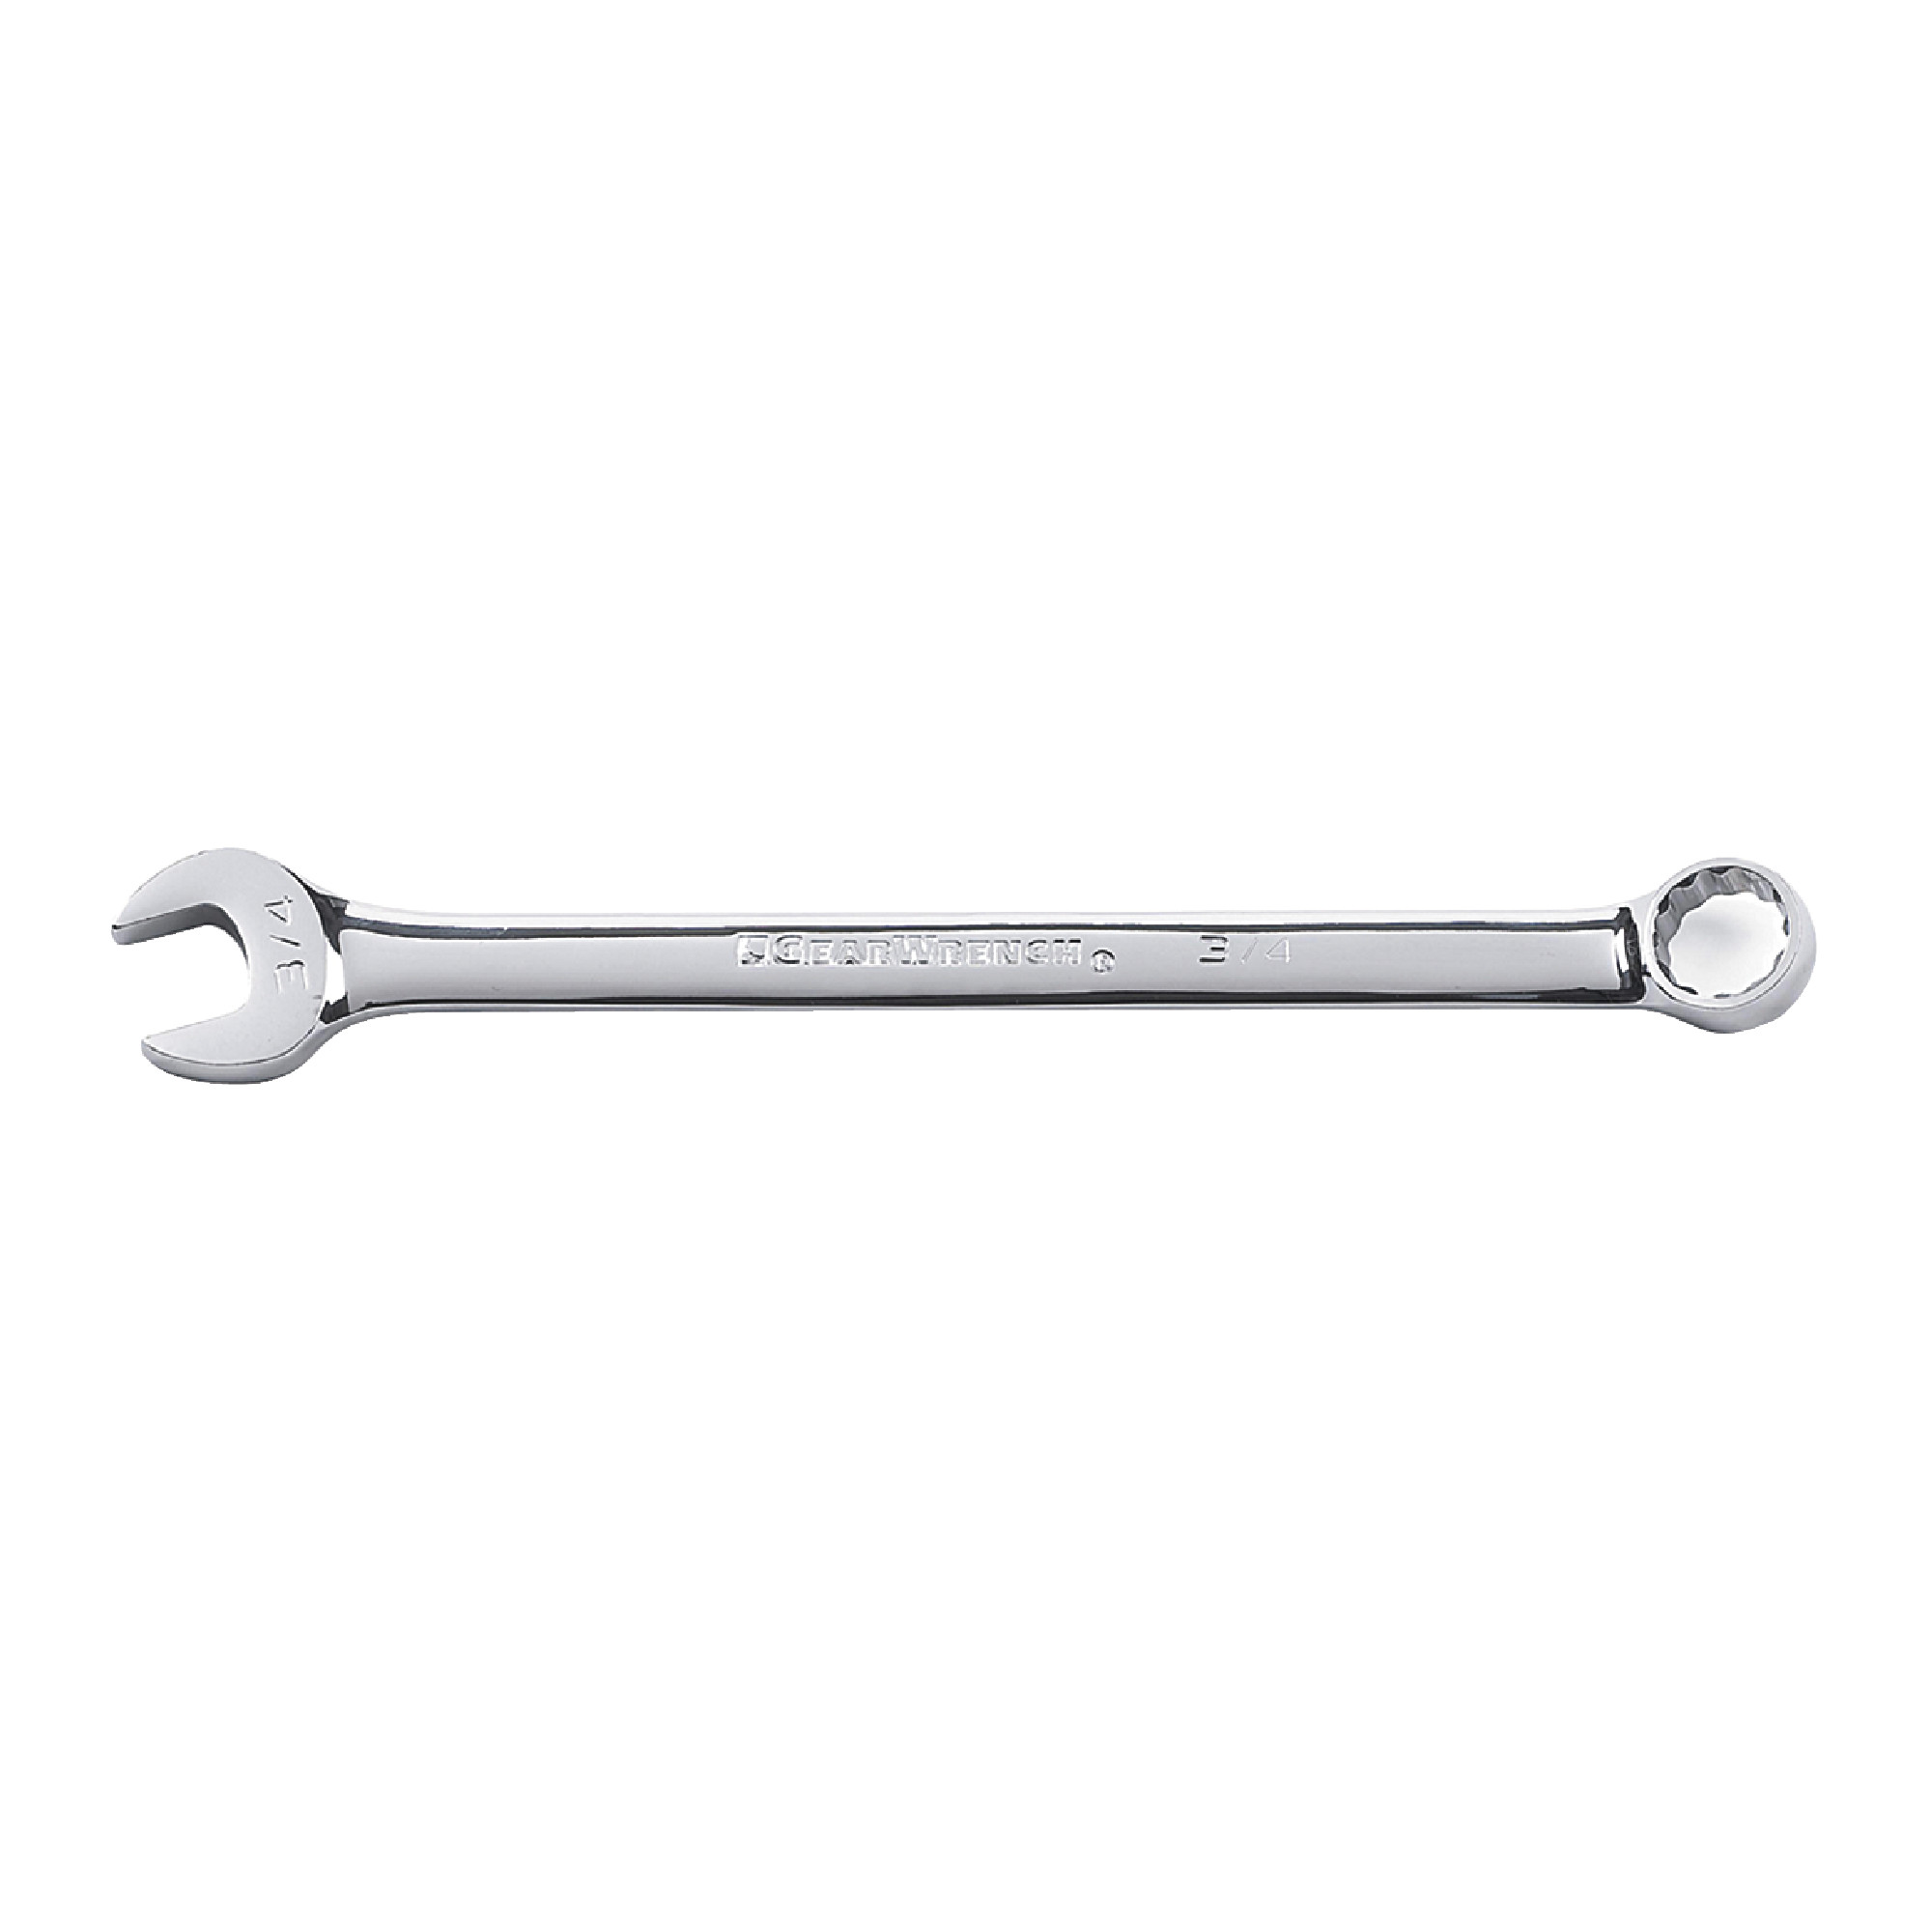 28mm 12 Point Long Pattern Combination Wrench